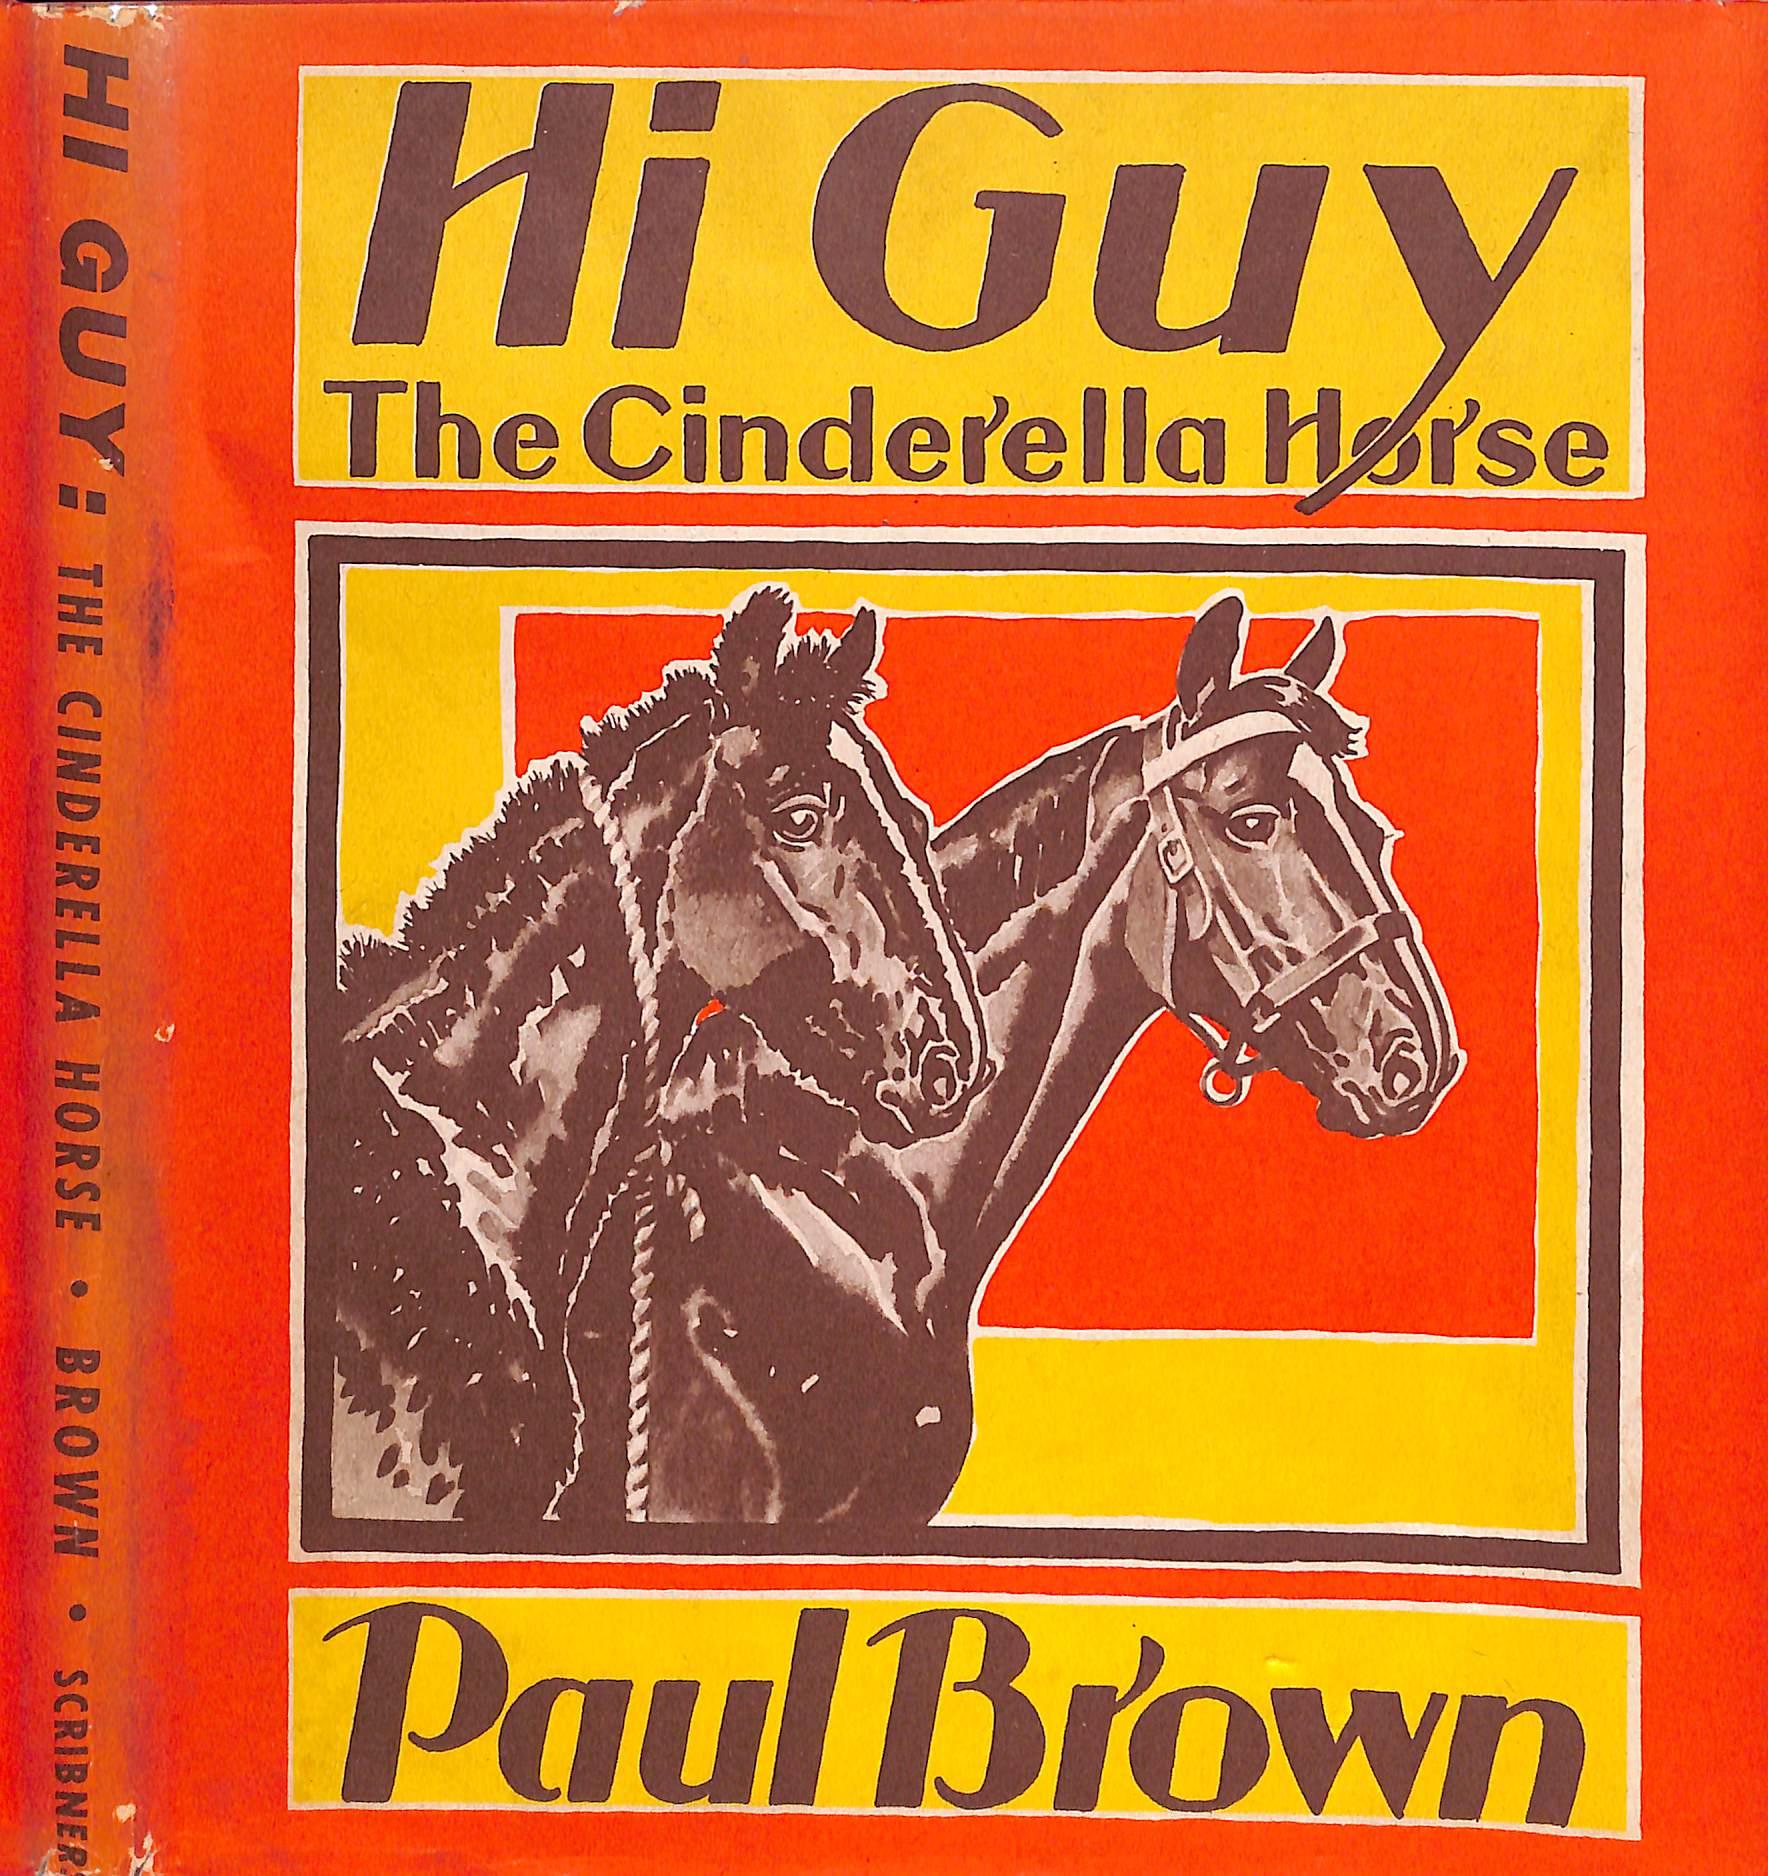 Original 1944 Pencil Drawing From Hi, Guy! The Cinderella Horse By Paul Brown 35 For Sale 5